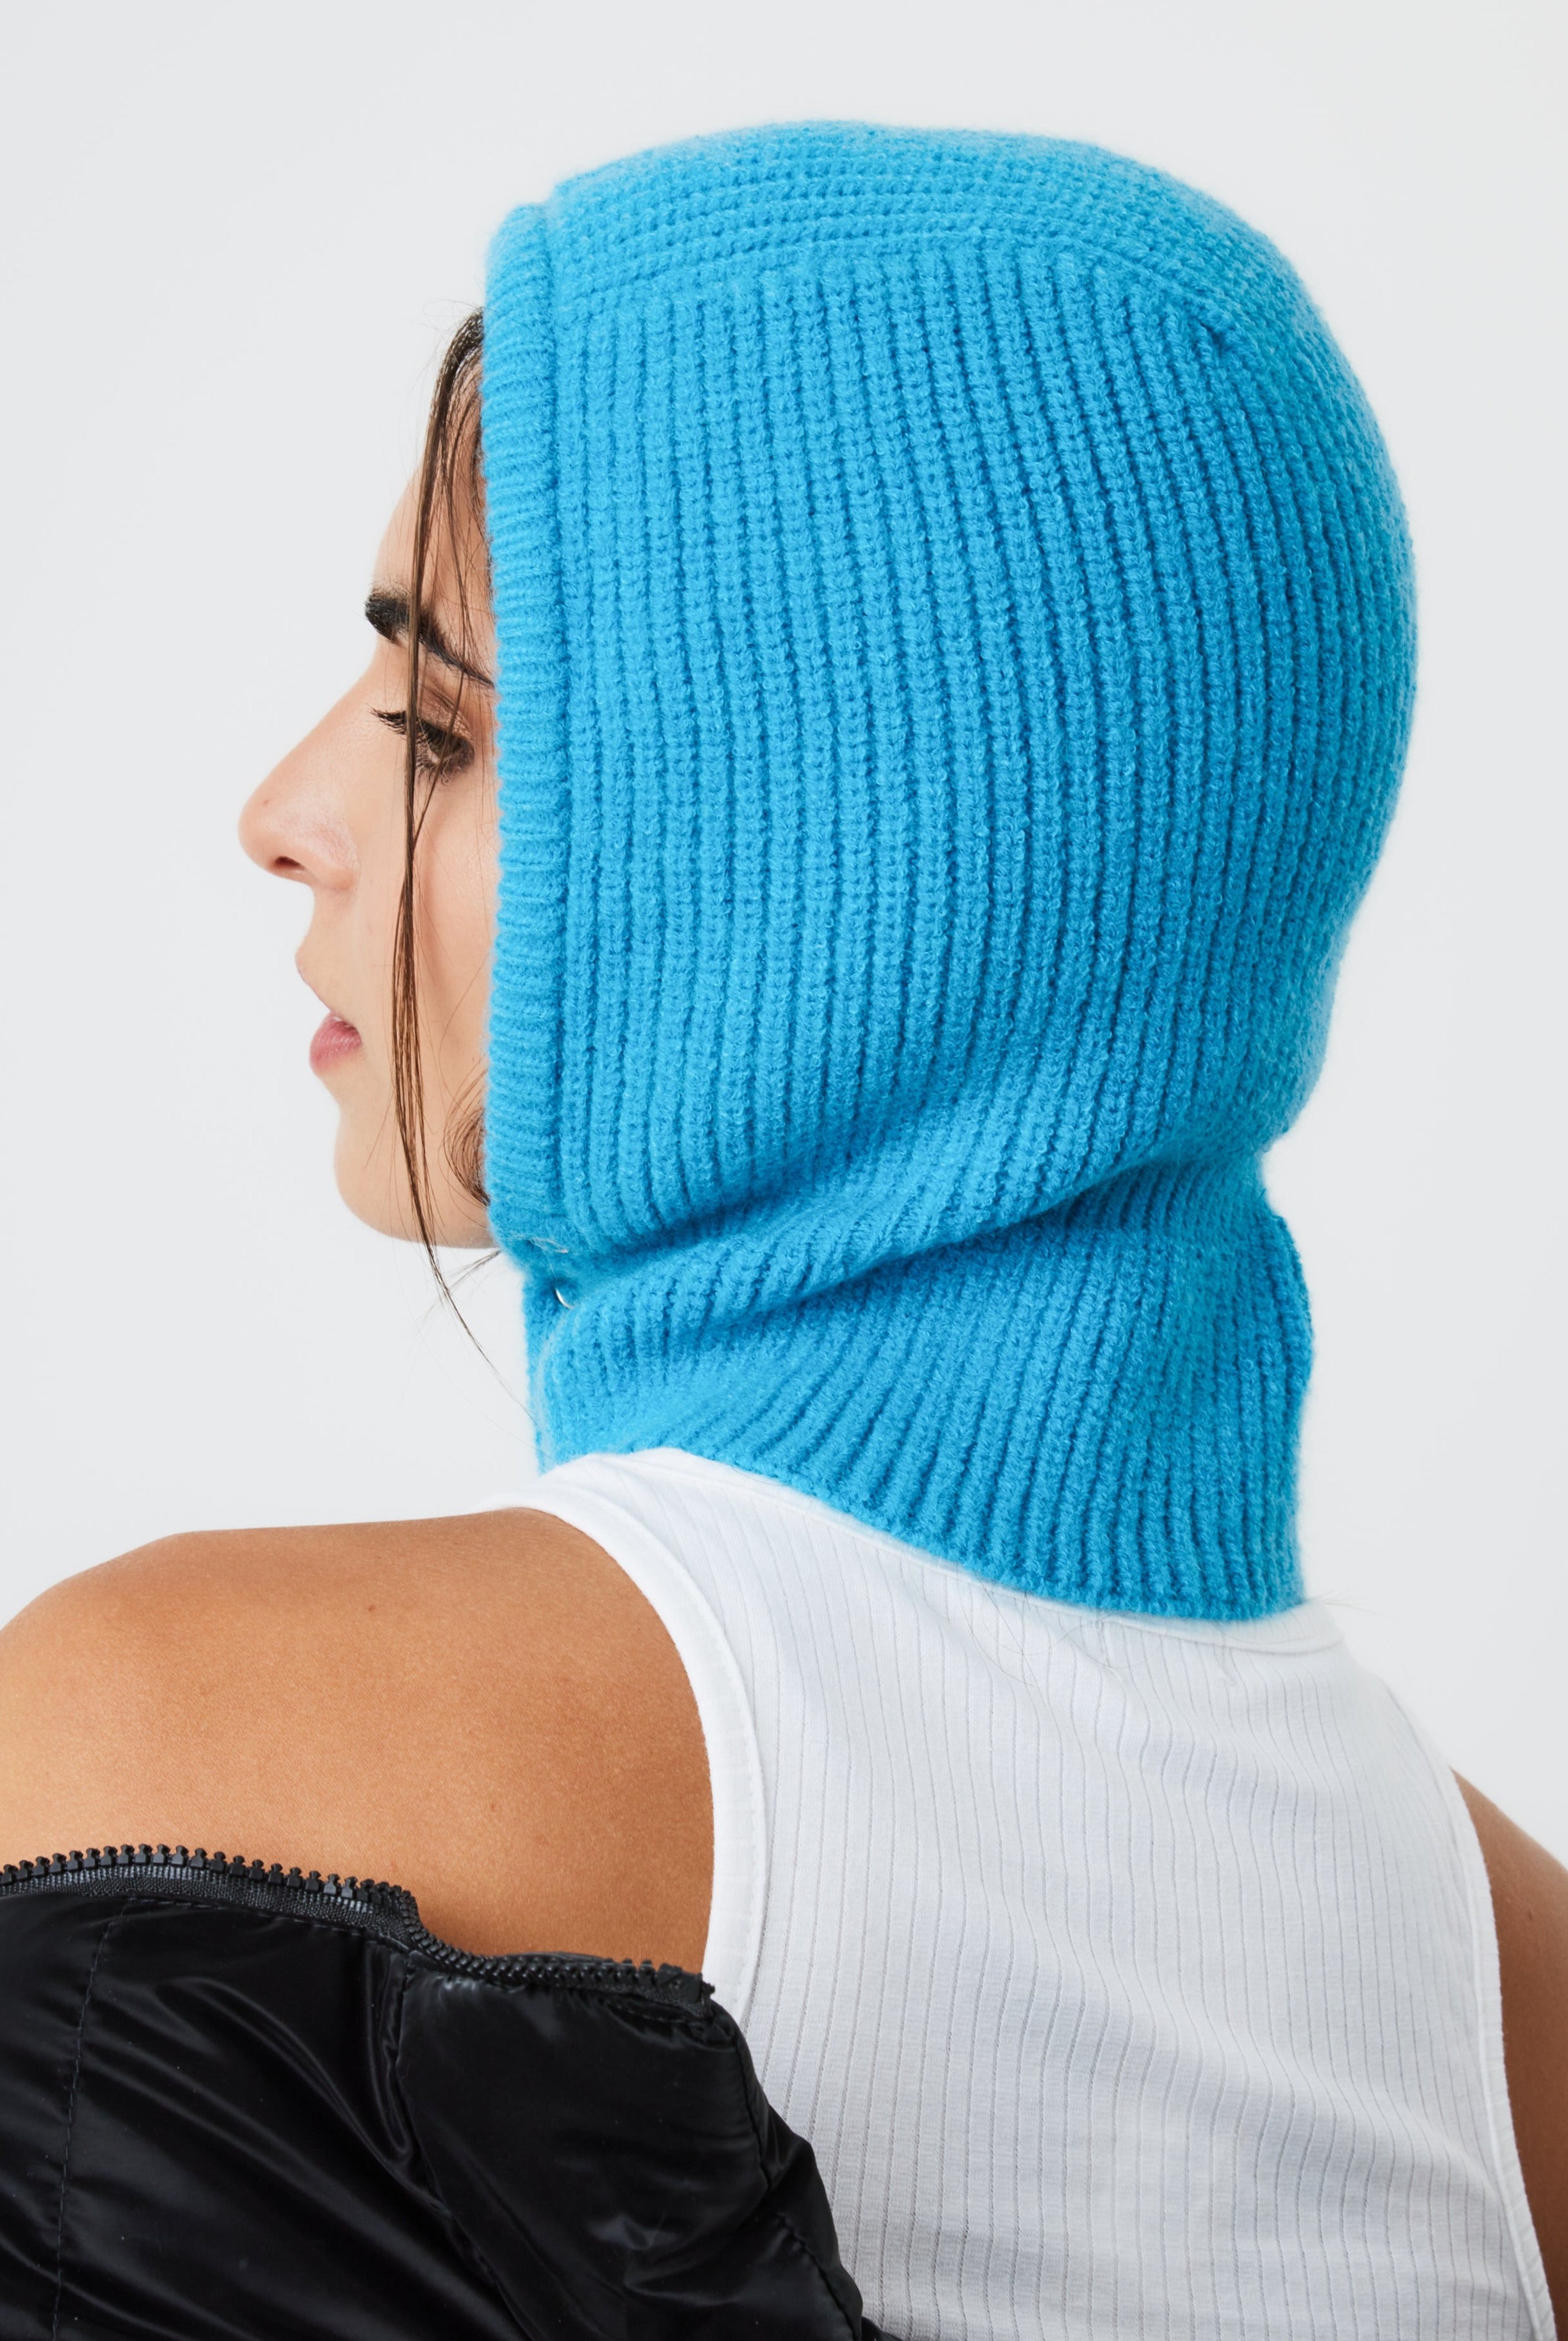 My Accessories London Button Up Balaclava in Blue | Knitted | Ski | Skiing | Outdoor | Winter | Autumn | Cold Weather | Walking | Hiking | Hood | Streetstyle | Women's Gorpcore